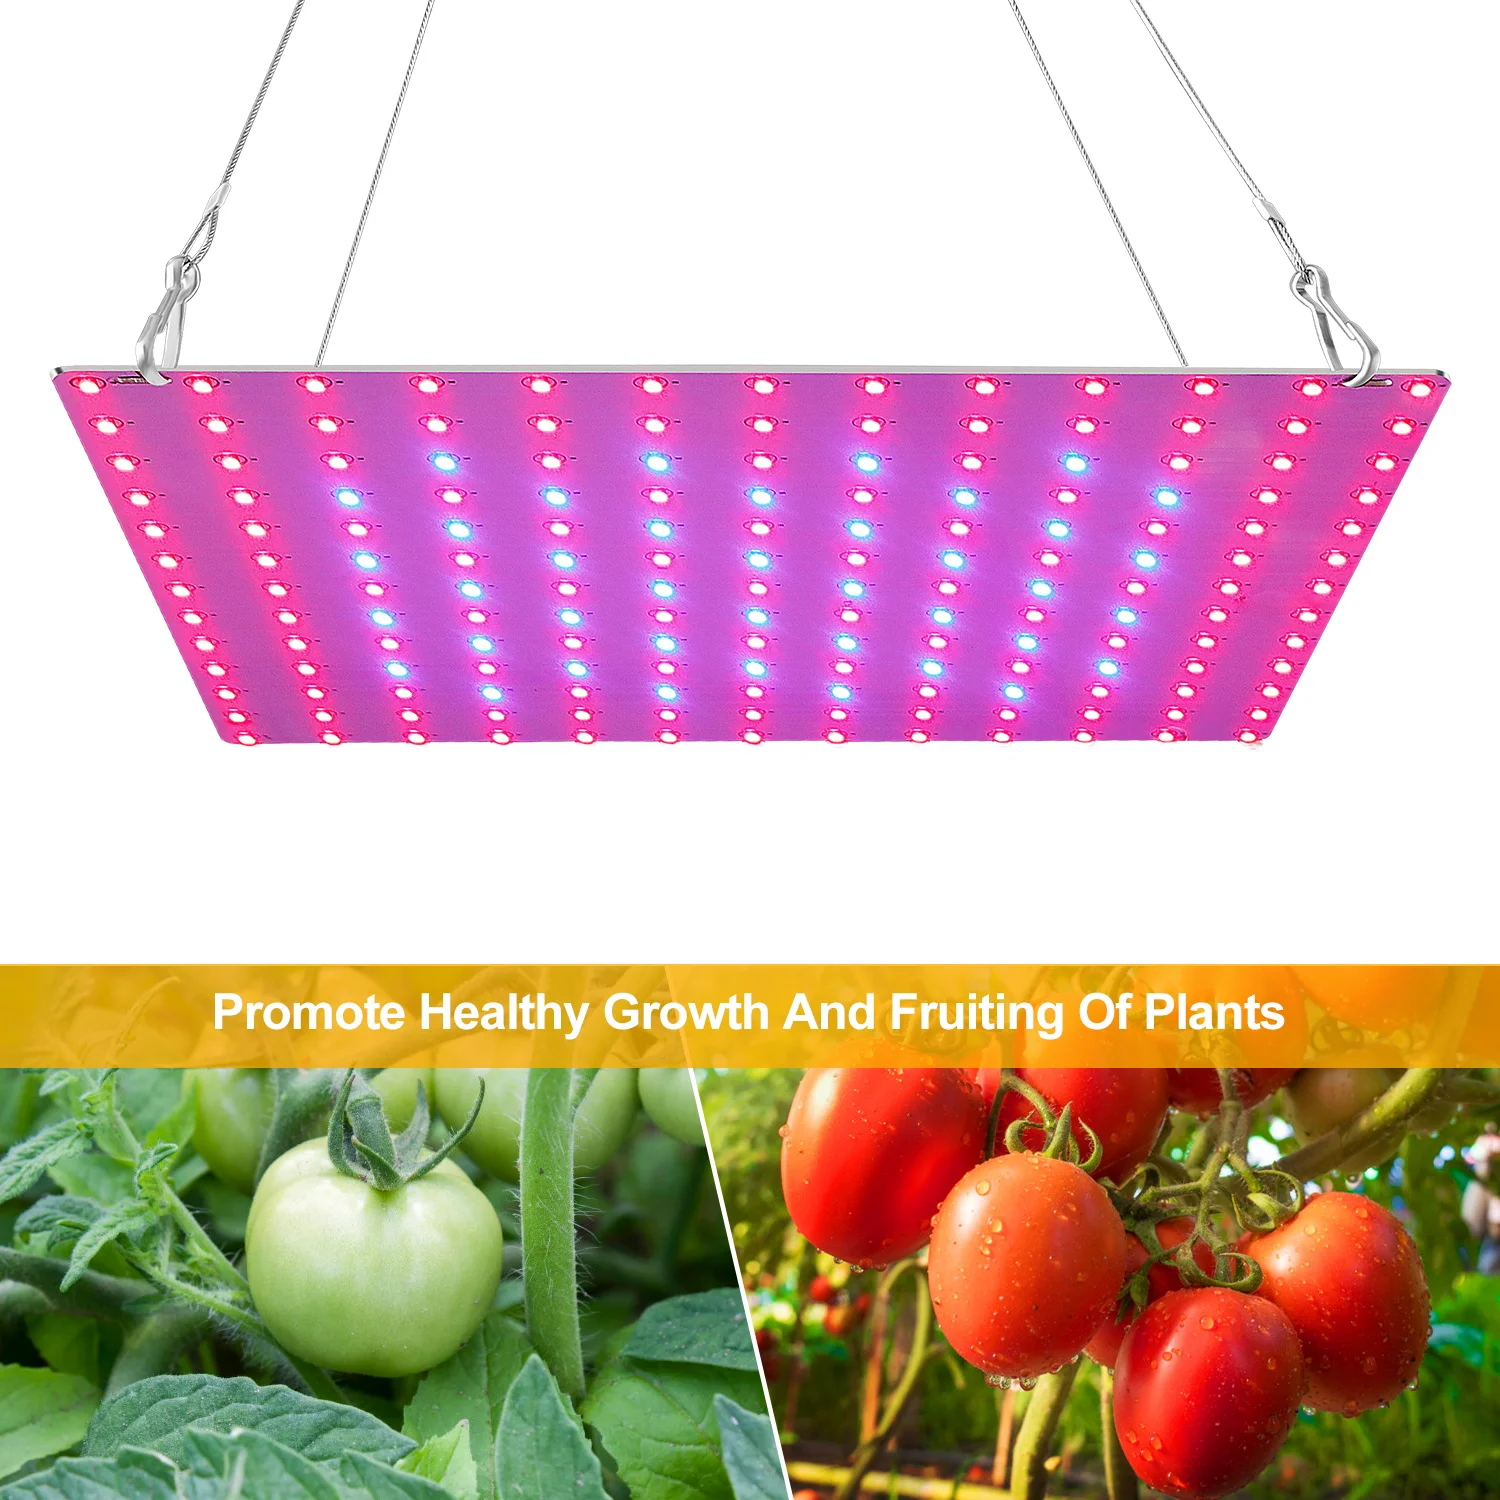 

Full Spectrum 200W Grow Light LED Plant Lamp Phyto Grow Tent Fitolampy 300W Quantum Board Greenhouse Lighting Vegs Flower Seed